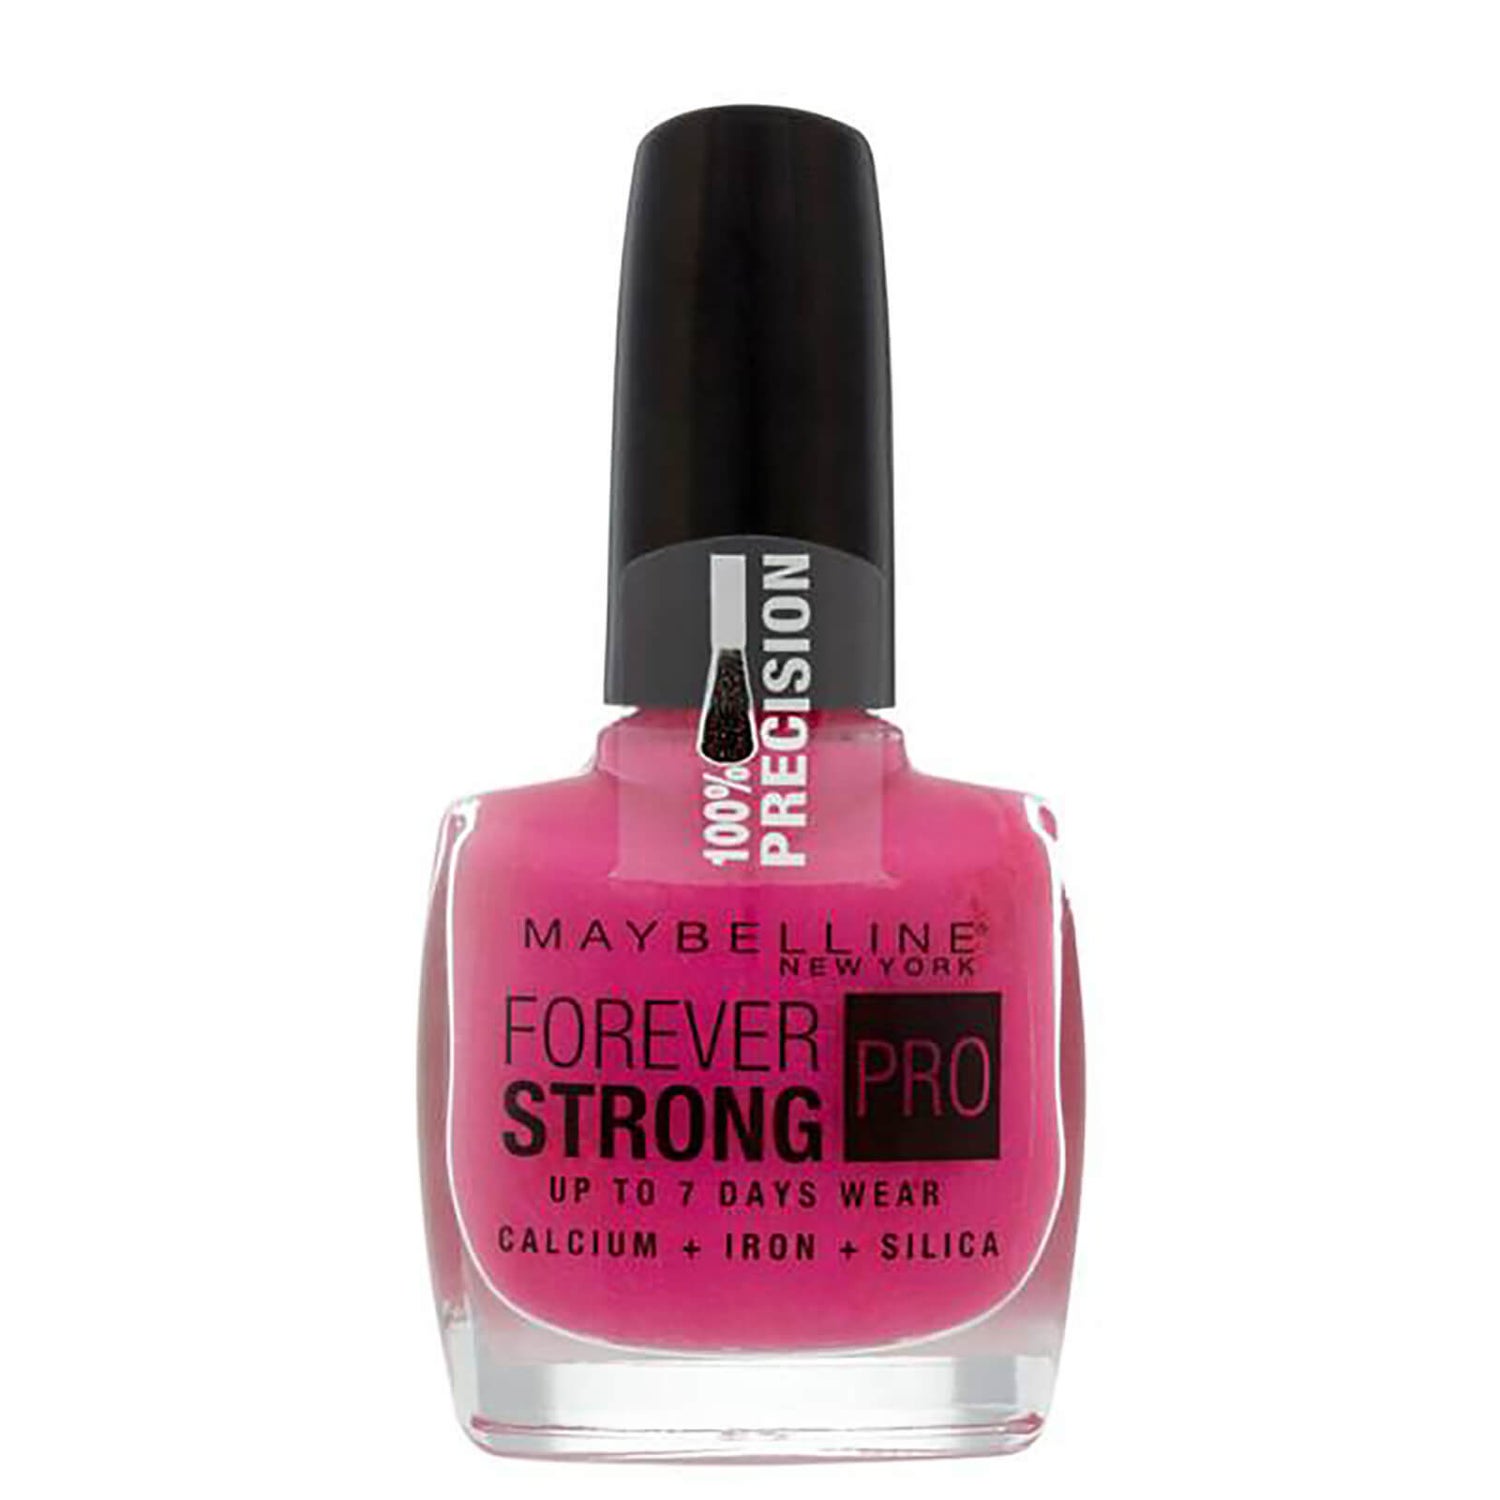 Maybelline New York Forever Strong Pro Nagellack - 155 Bubble Gum (10ml)